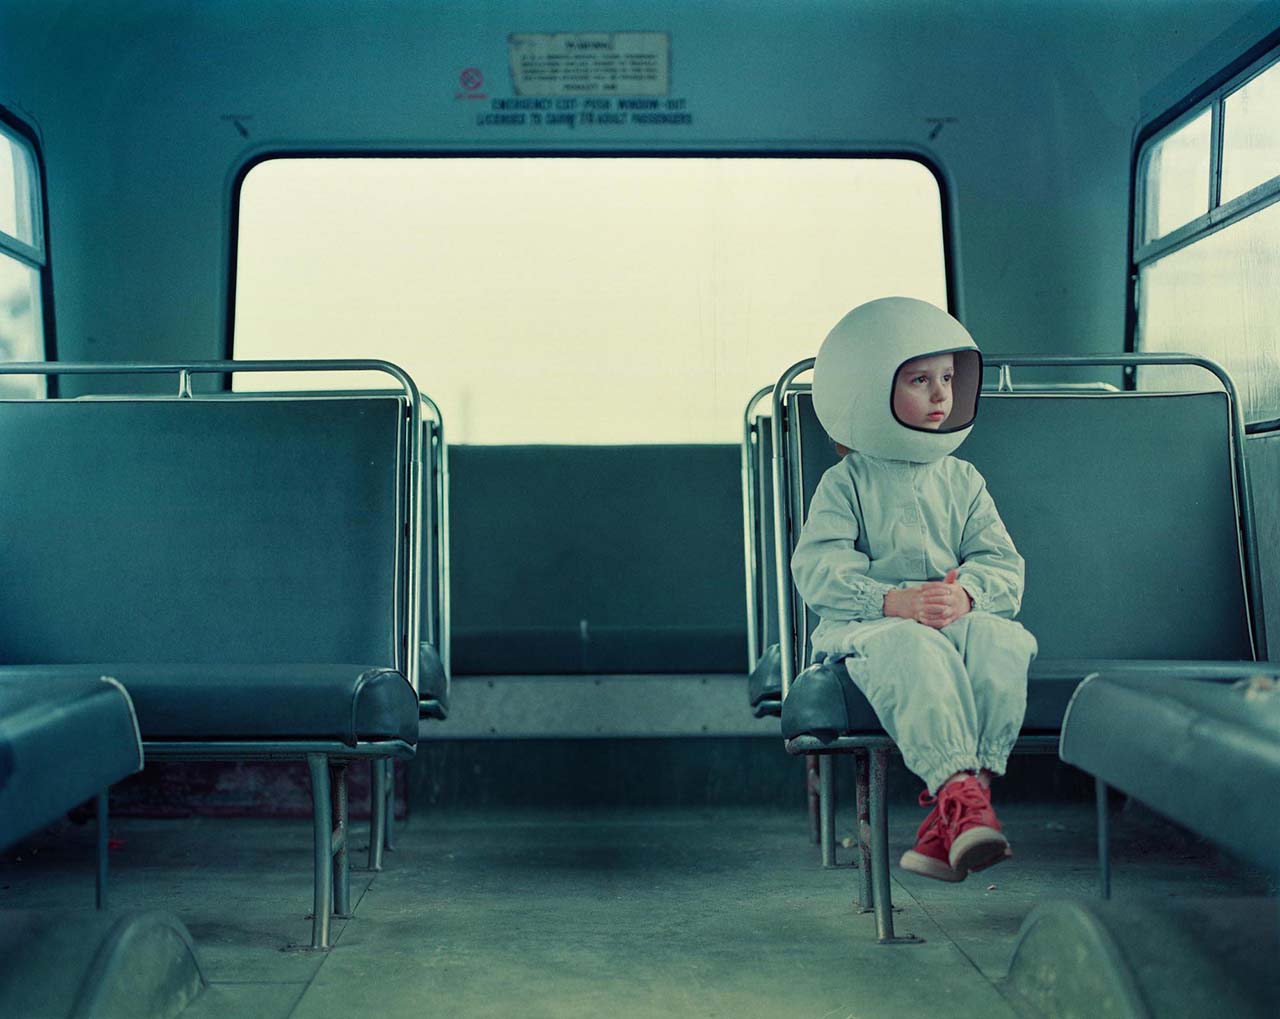 A young girl wearing a spacesuit costume and helmet sits on an empty bus.